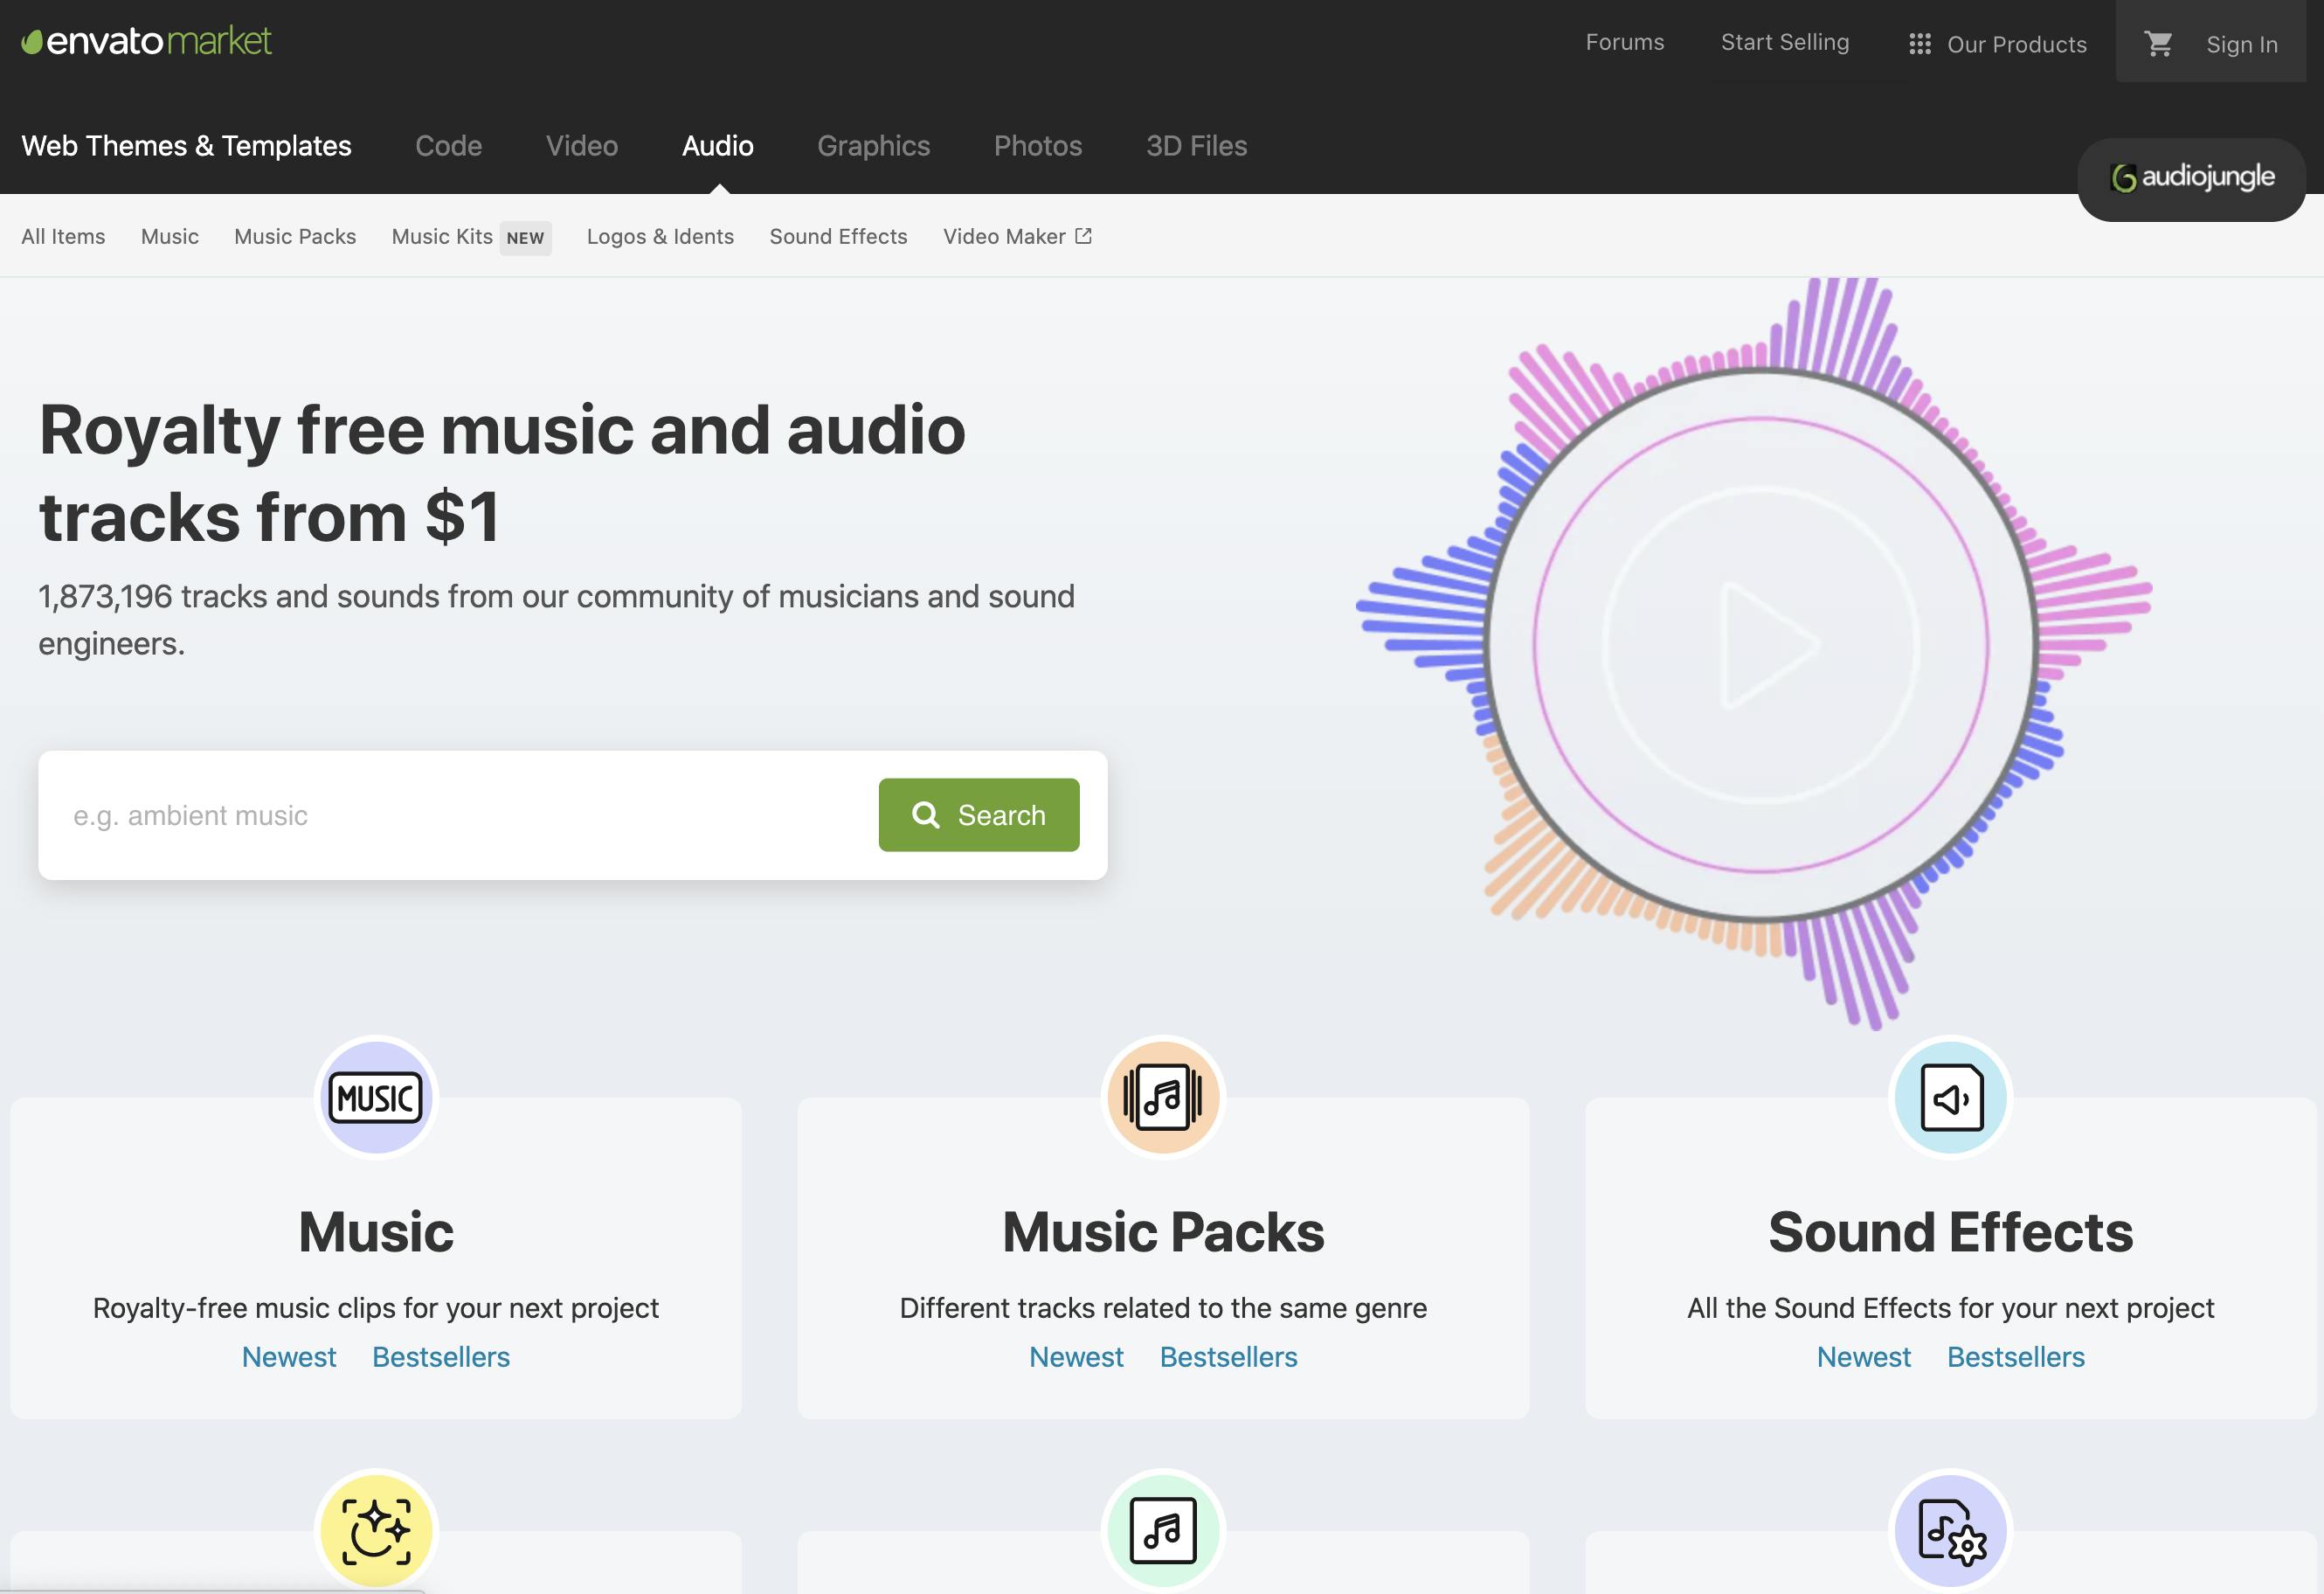 Guide to the  Audio Library & Royalty Free Music for Videos